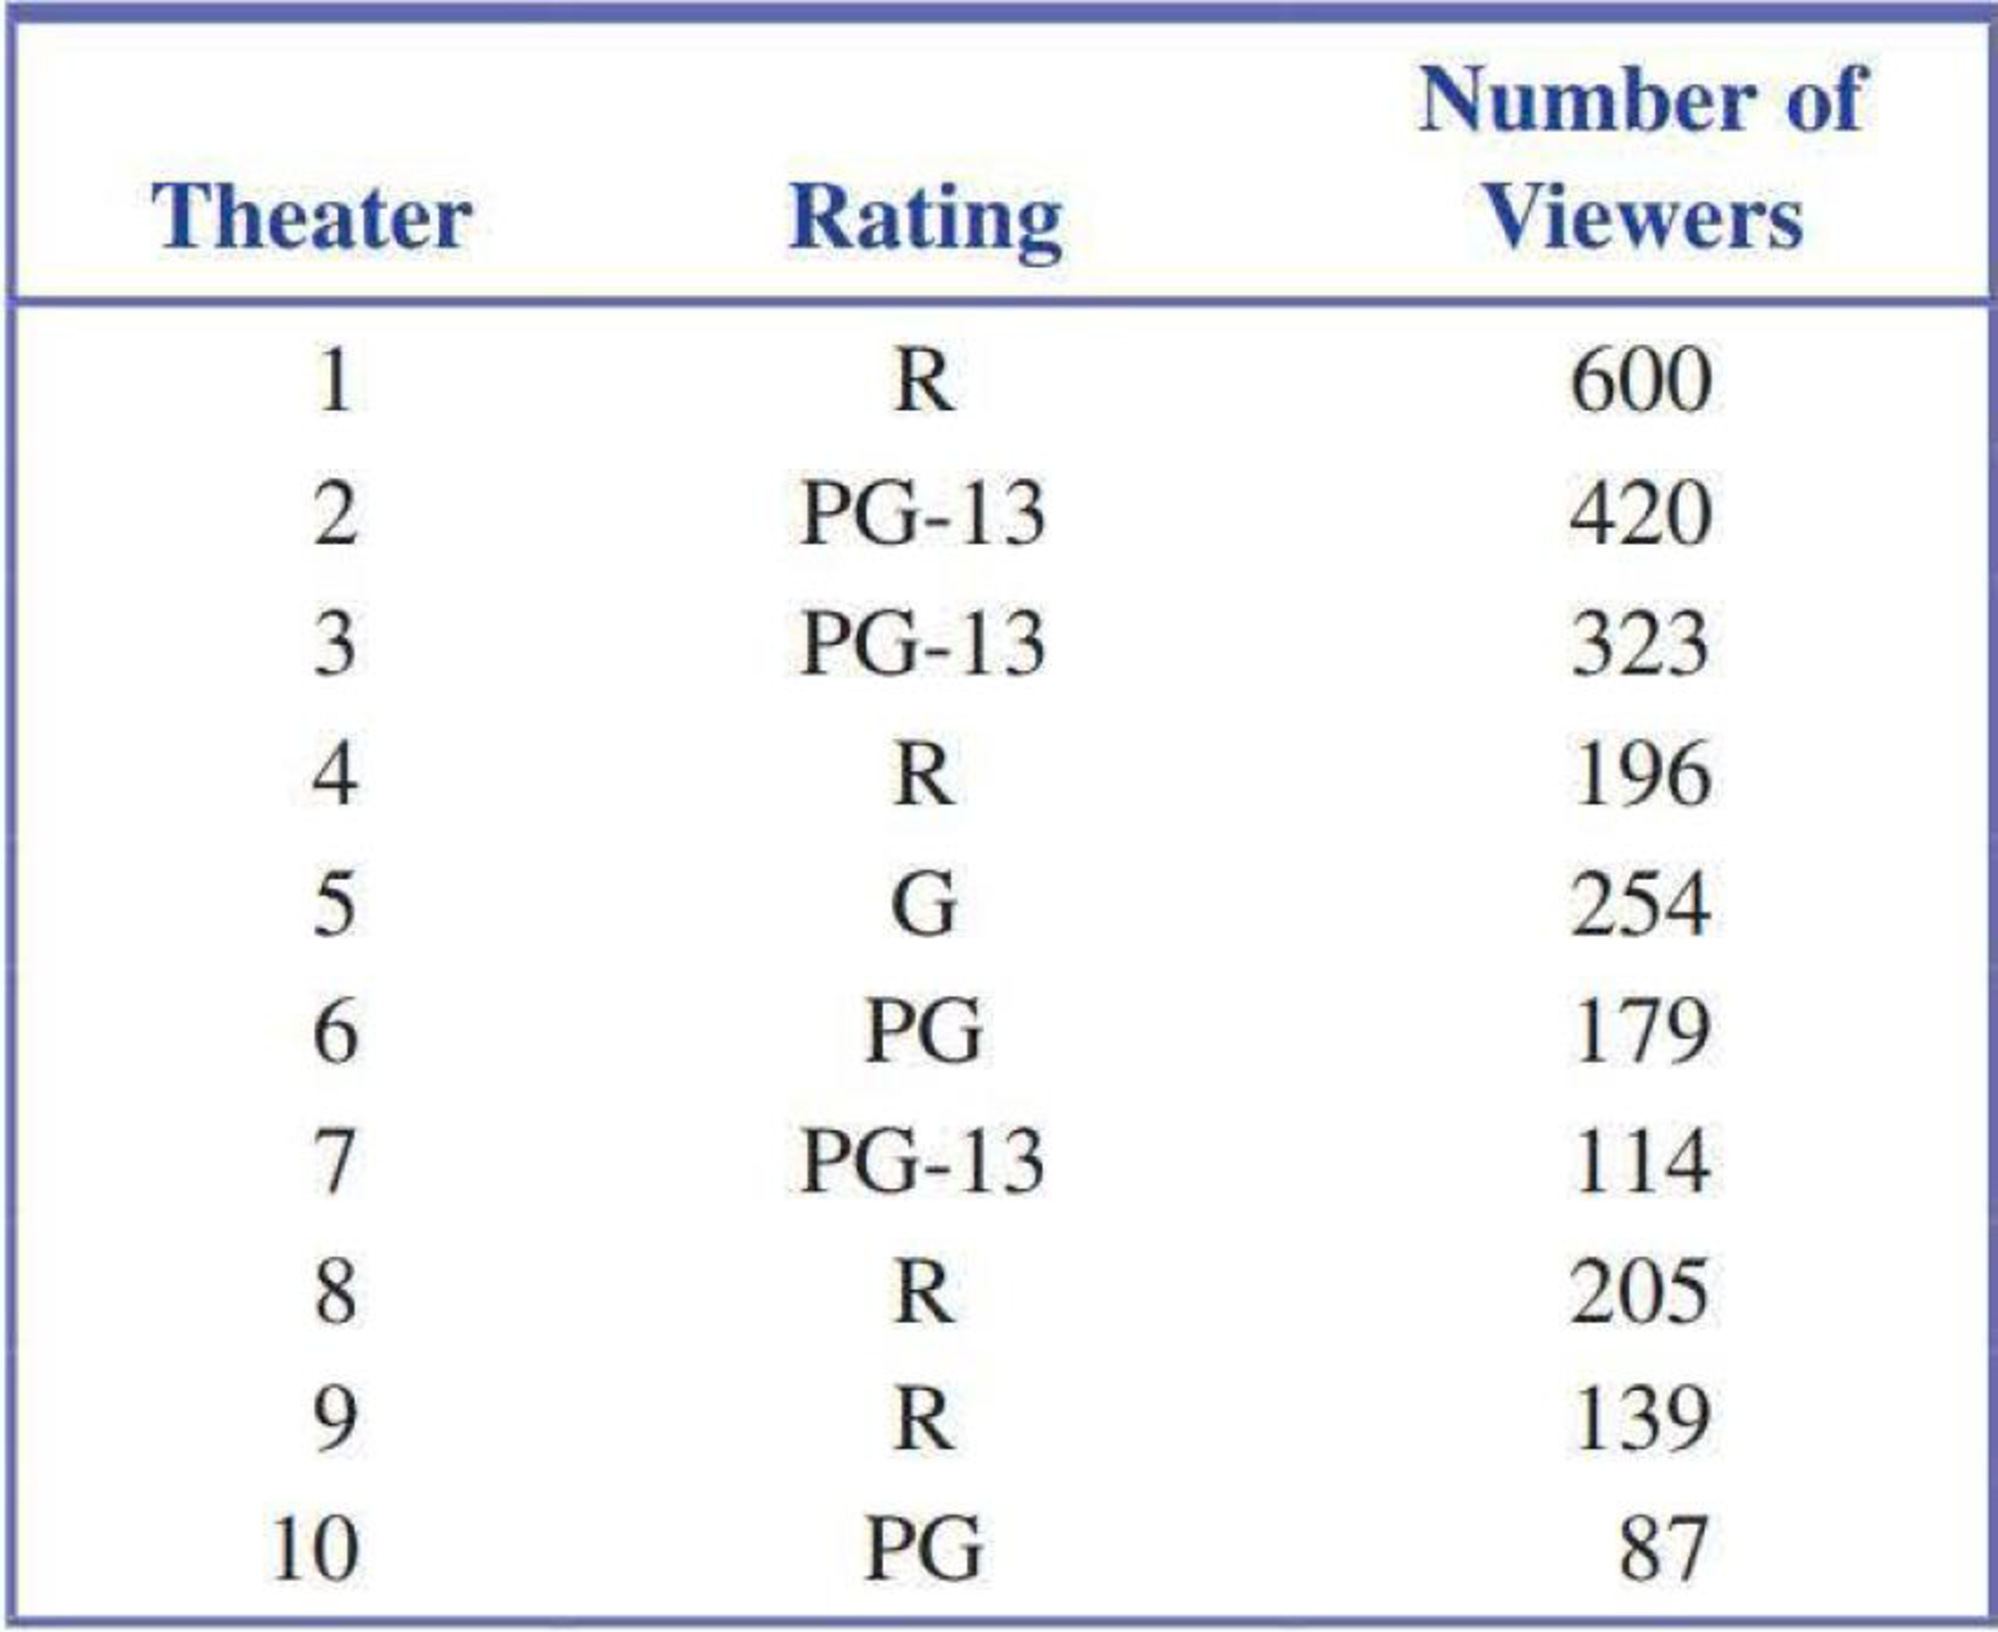 A Theater Complex Is Currently Showing Four R Rated Movies Three Pg 13 Movies Two Pg Movies And One G Movie The Following Table Gives The Number Of People At The First Showing Of